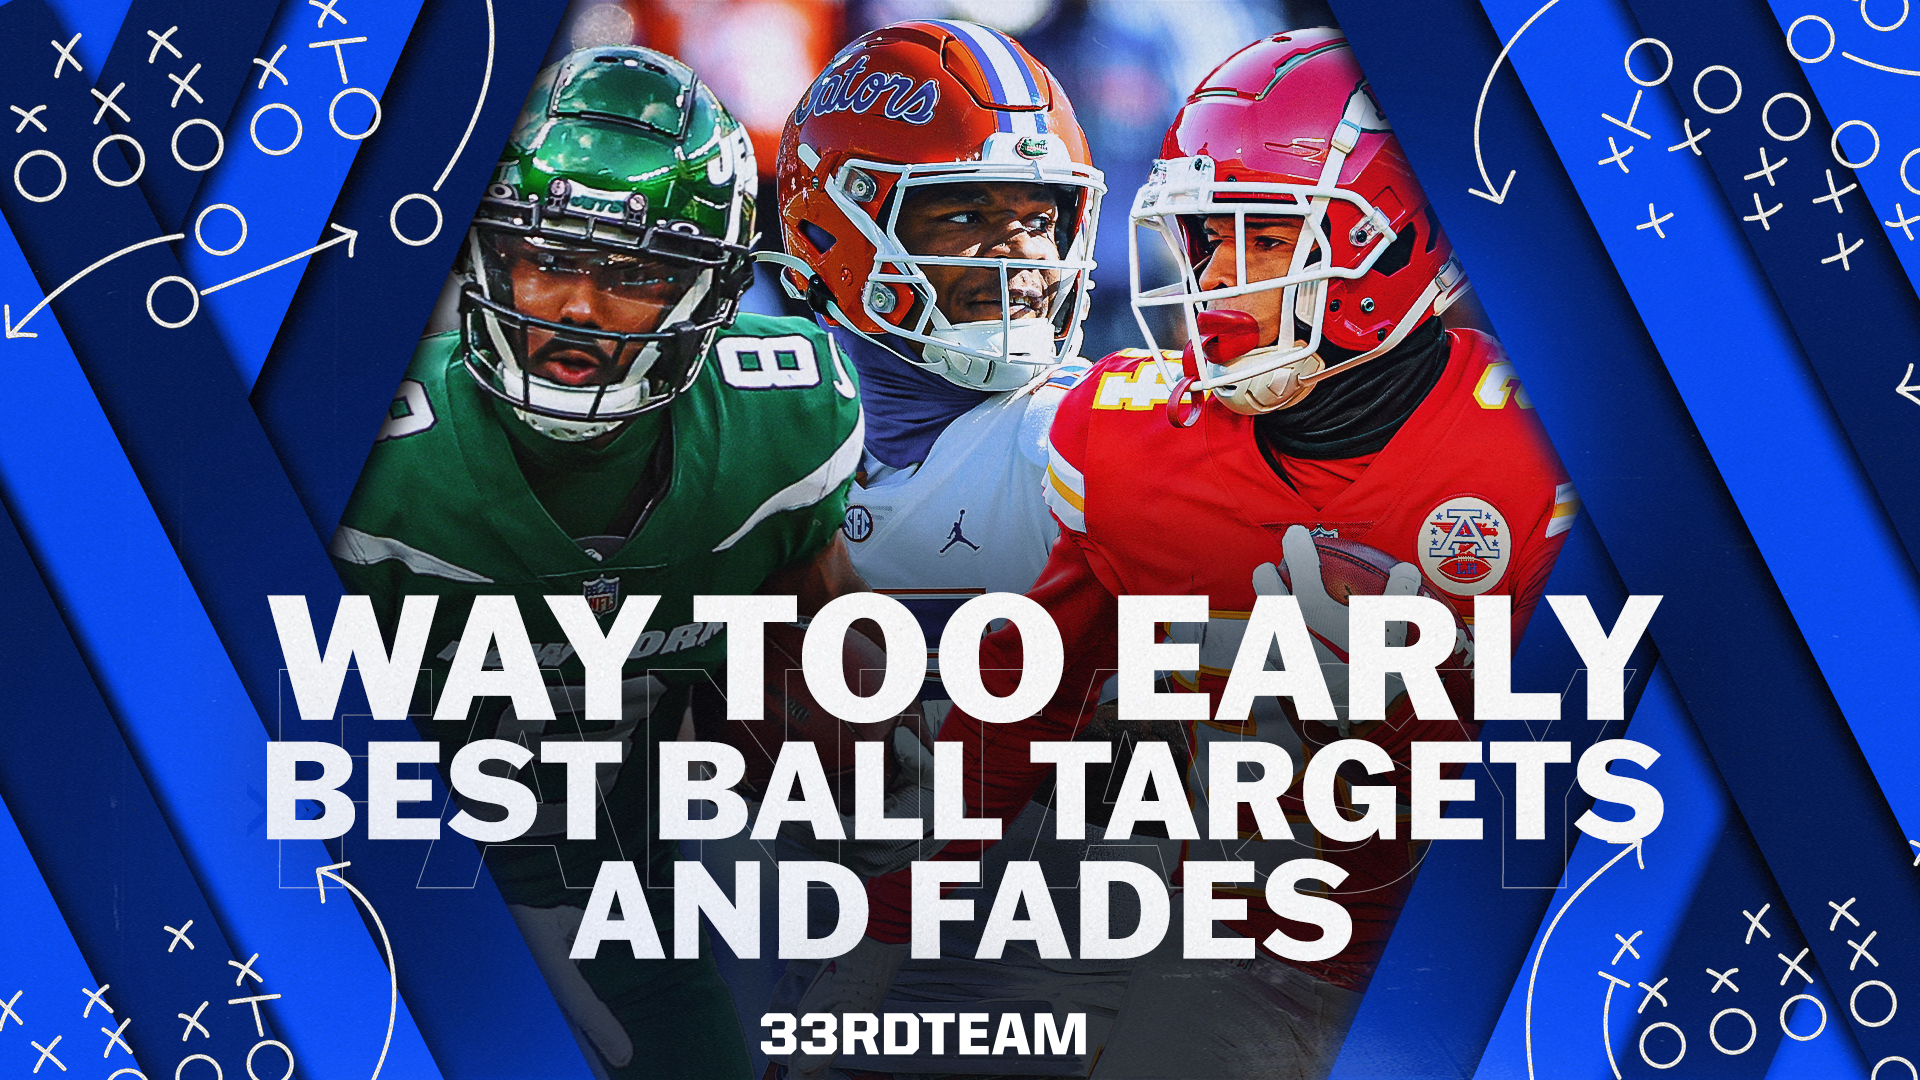 Underdog Fantasy: Way Too Early Best Ball Targets